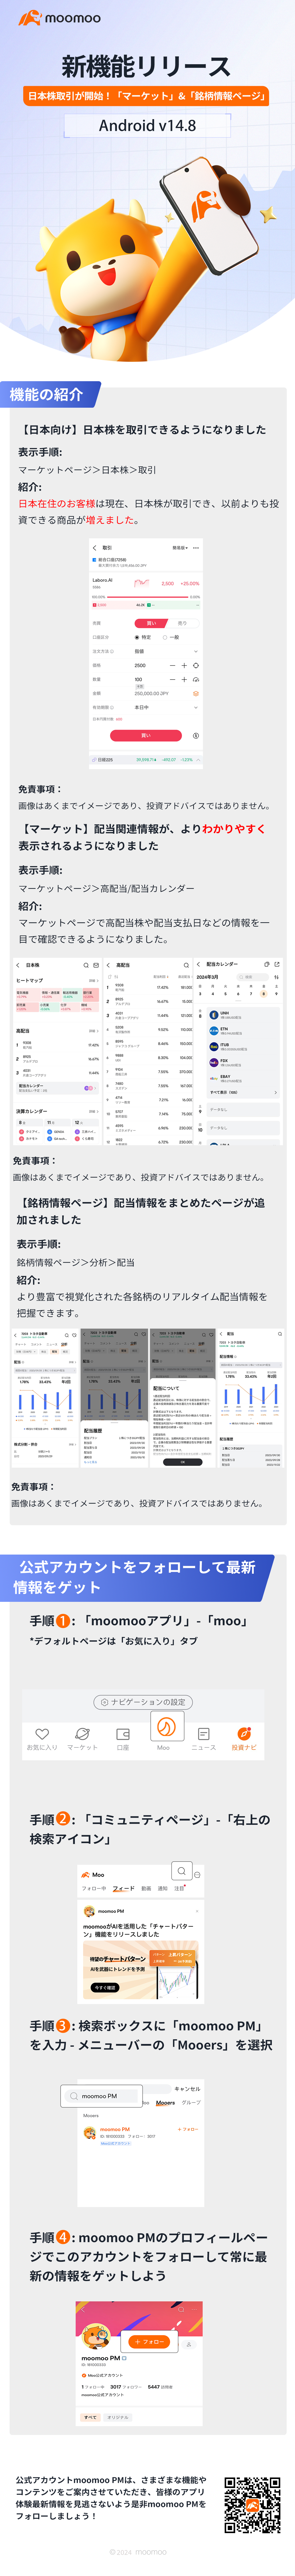 New feature released: Japanese stock trading has started! “Market” & “Stock Information Page” Android v14.8